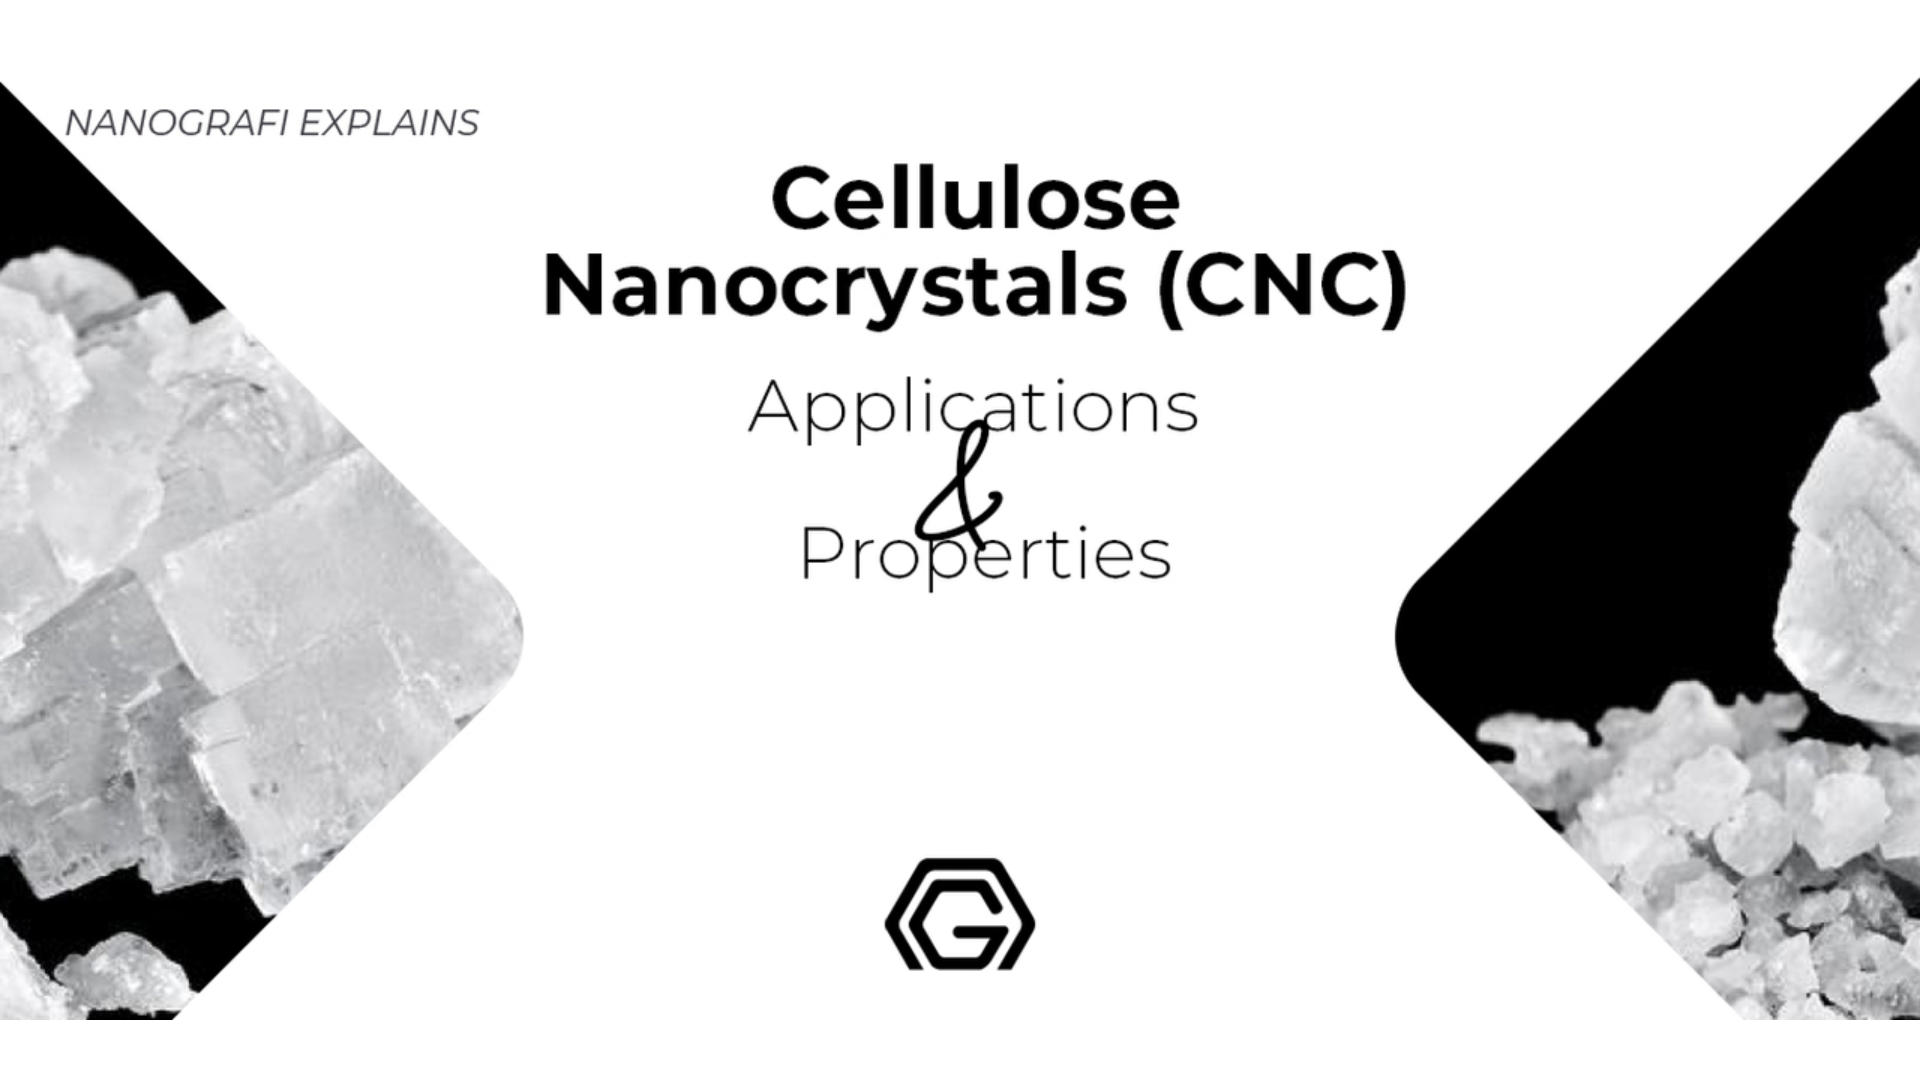 Cellulose nanocrystals (CNC) applications and properties